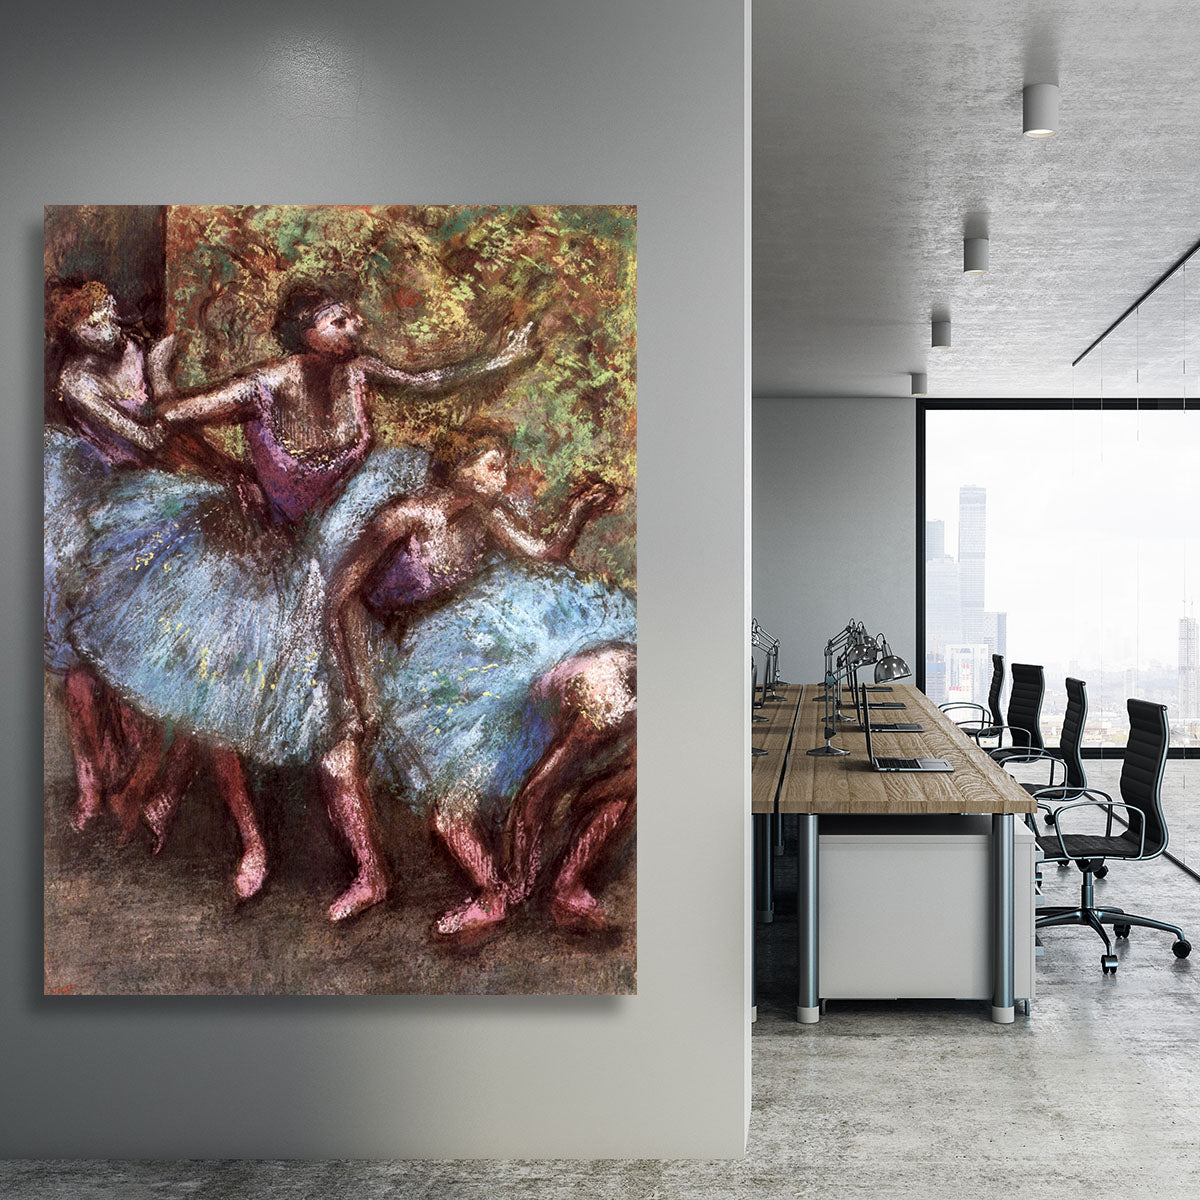 Four dancers behind the scenes 1 by Degas Canvas Print or Poster - Canvas Art Rocks - 3